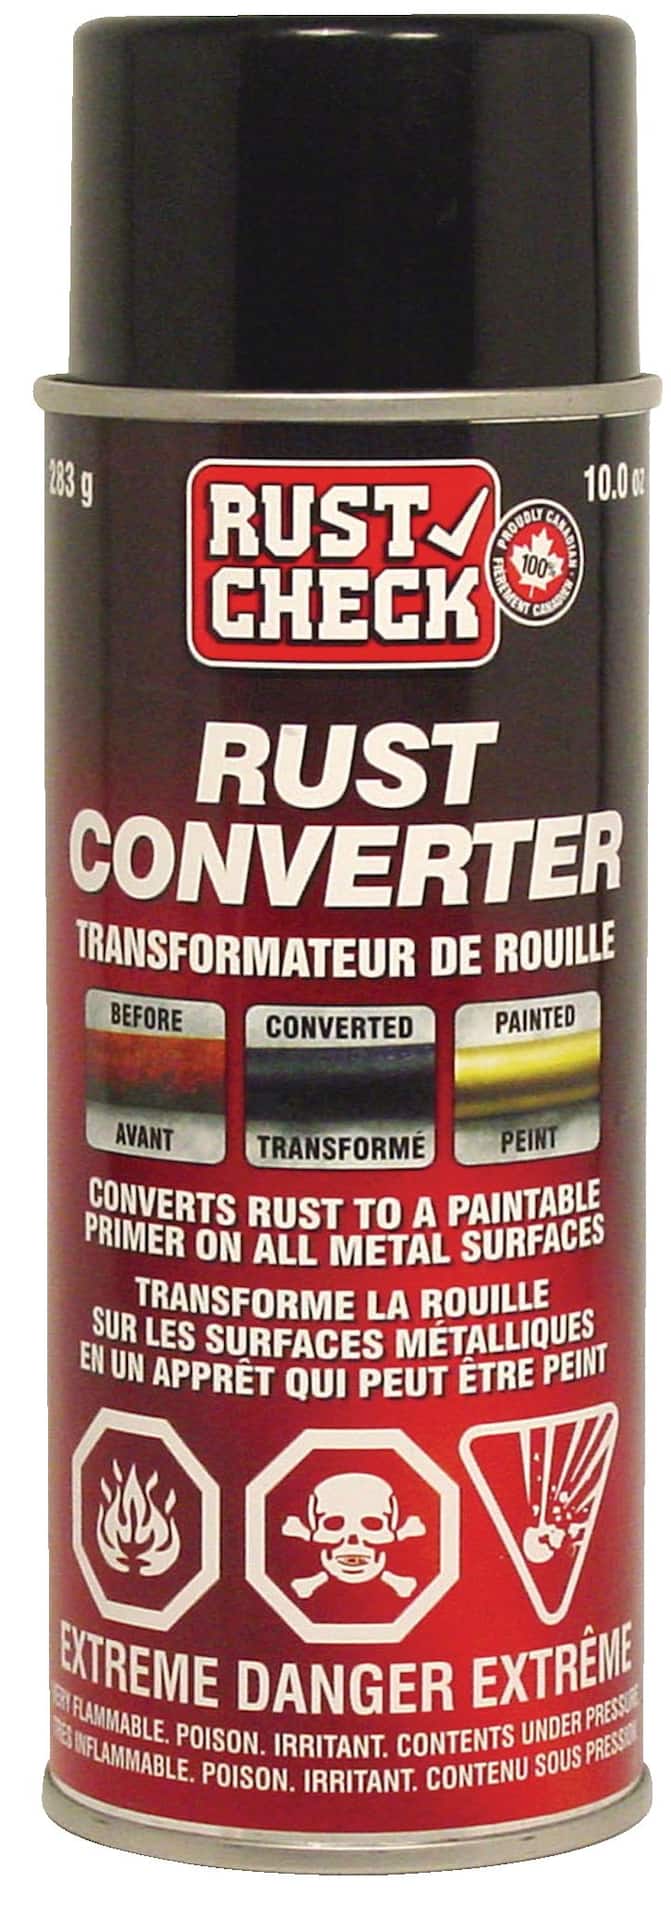 More Rust Gone videos! Convert the rust, provide yourself a paintable